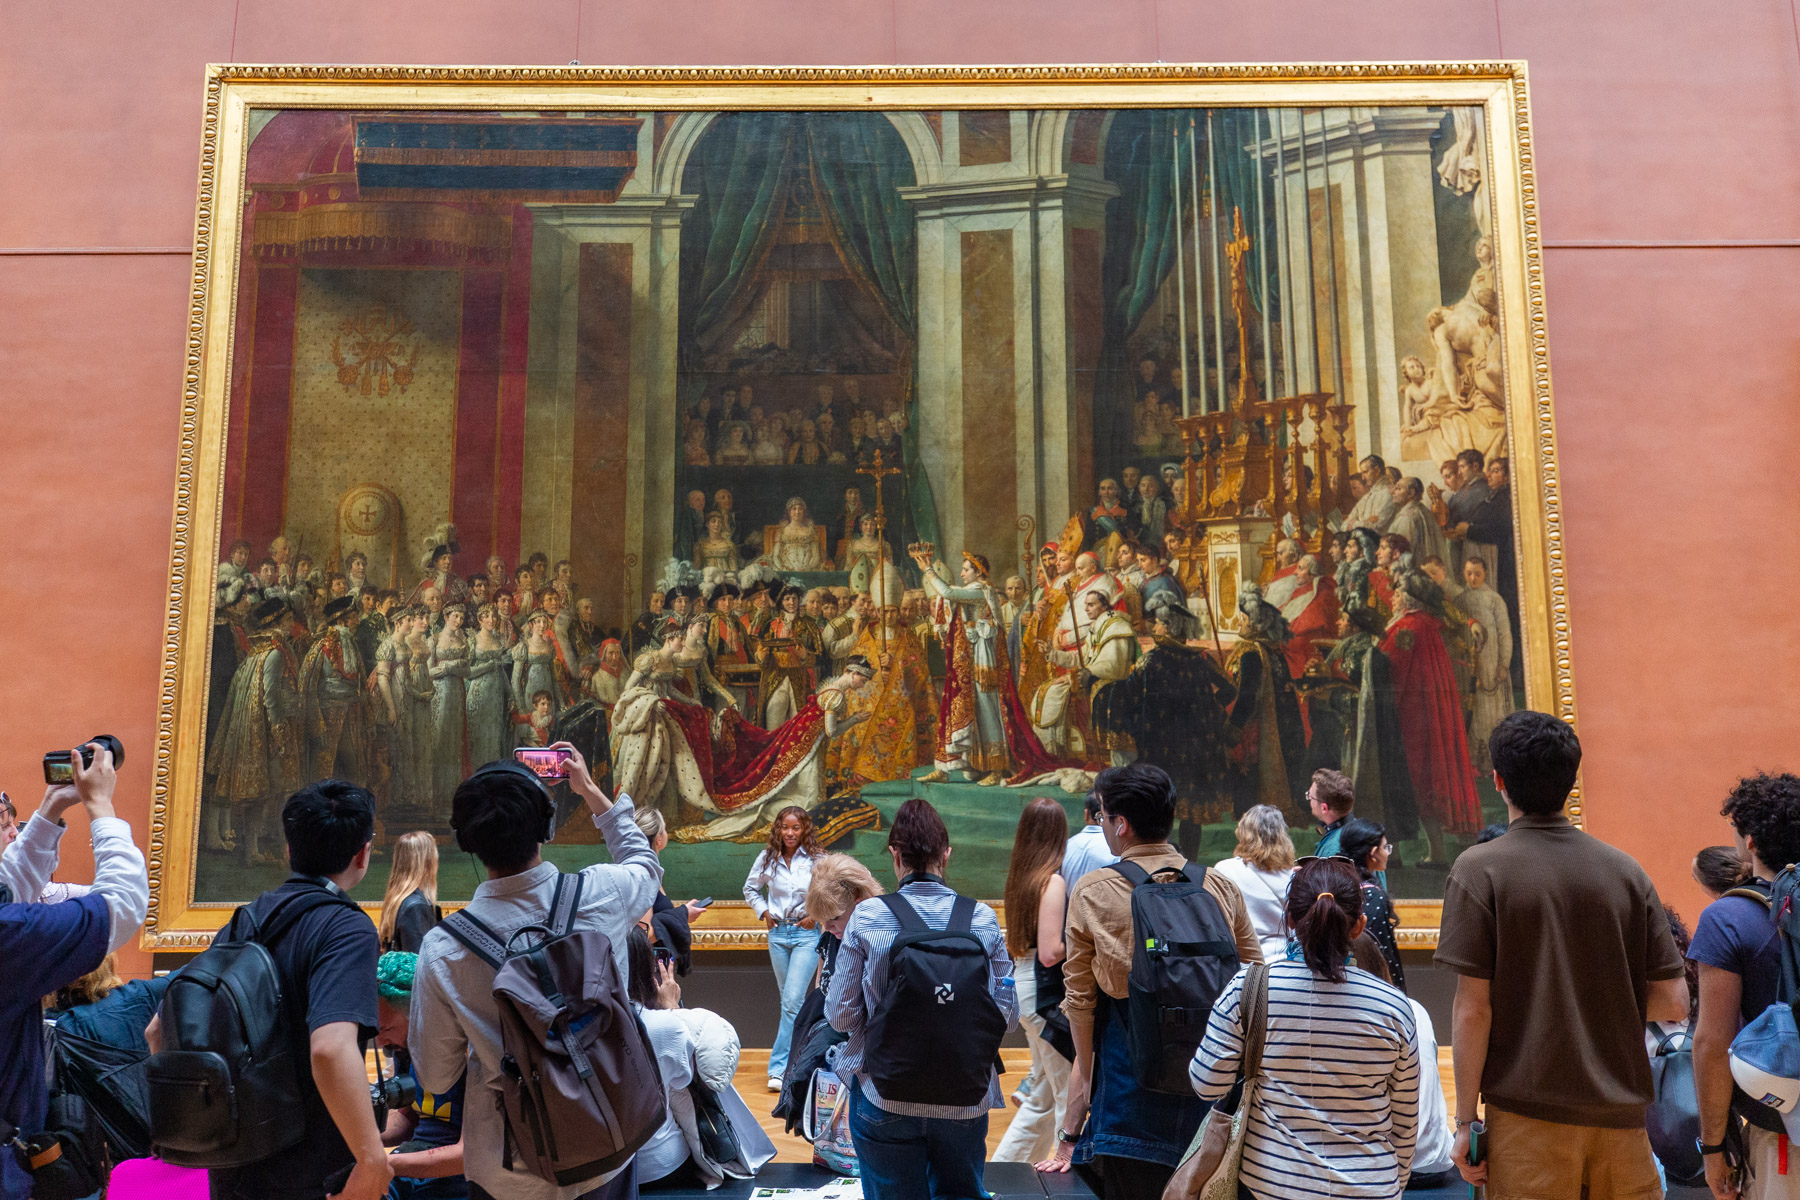 Crowds in front of The Coronation of Napoleon, things to see at the Louvre